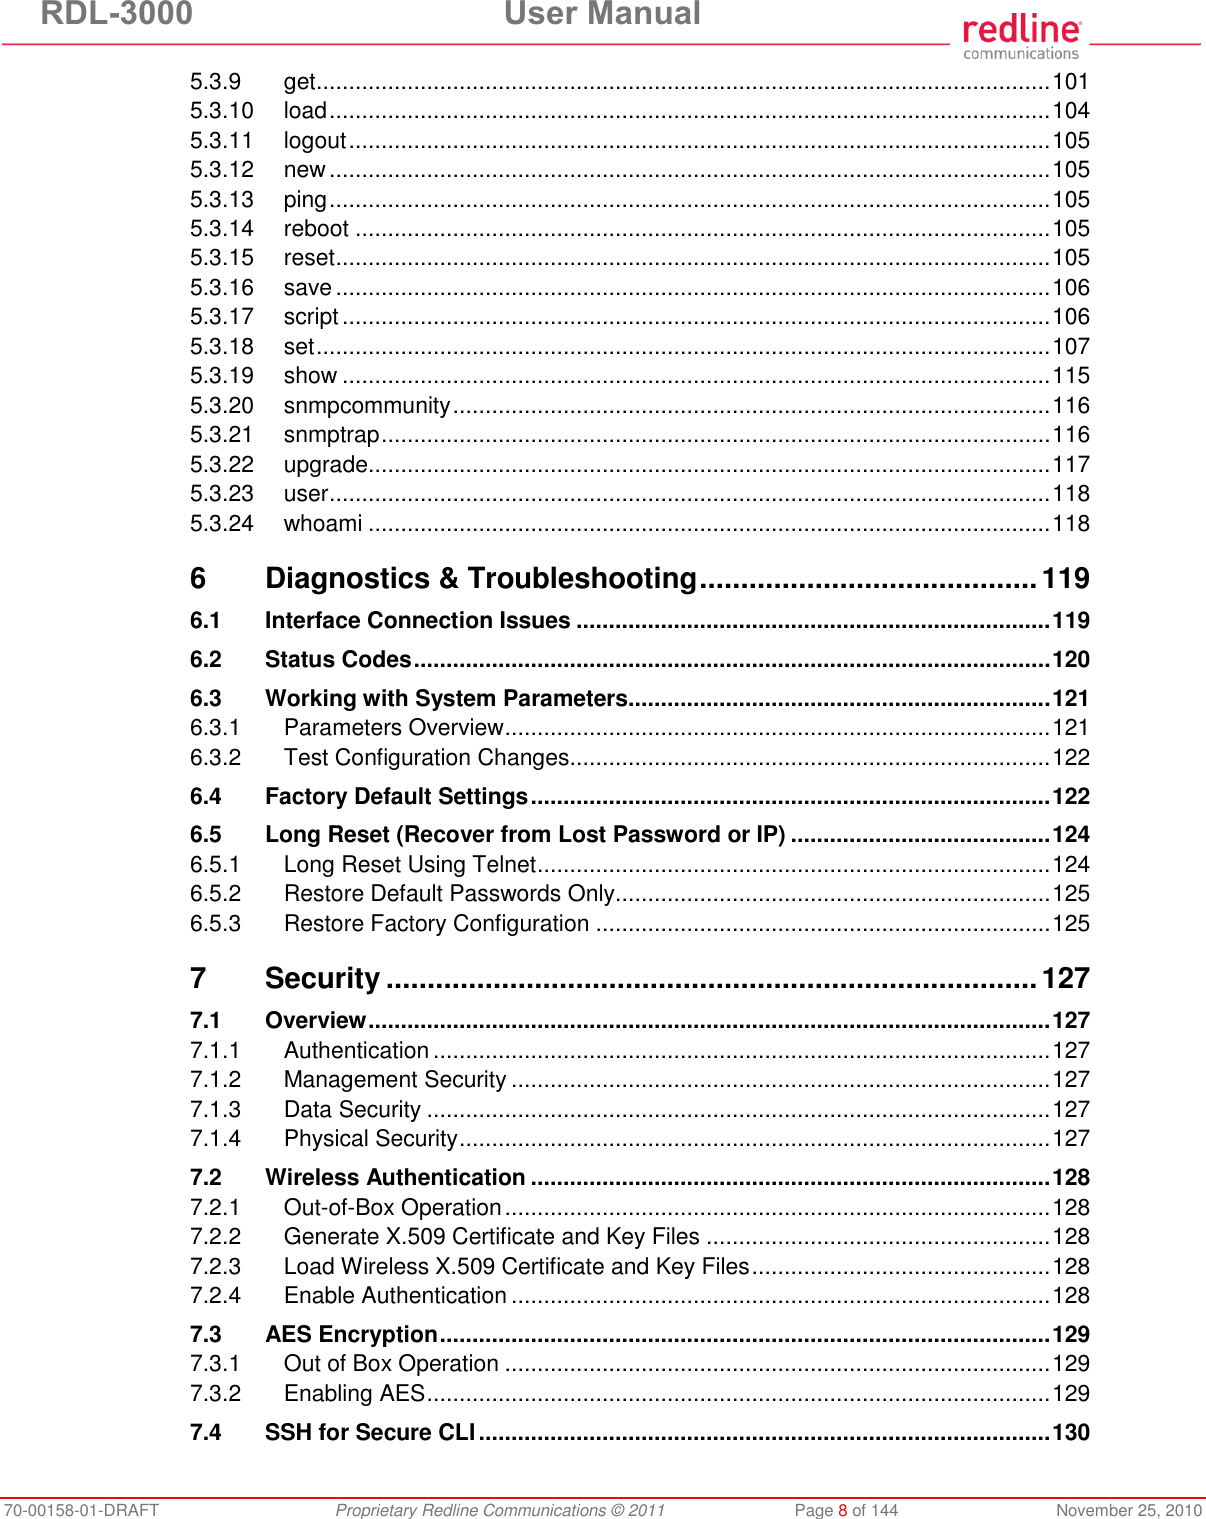 RDL-3000  User Manual 70-00158-01-DRAFT  Proprietary Redline Communications © 2011  Page 8 of 144  November 25, 2010 5.3.9 get ................................................................................................................. 101 5.3.10 load ............................................................................................................... 104 5.3.11 logout ............................................................................................................ 105 5.3.12 new ............................................................................................................... 105 5.3.13 ping ............................................................................................................... 105 5.3.14 reboot ........................................................................................................... 105 5.3.15 reset .............................................................................................................. 105 5.3.16 save .............................................................................................................. 106 5.3.17 script ............................................................................................................. 106 5.3.18 set ................................................................................................................. 107 5.3.19 show ............................................................................................................. 115 5.3.20 snmpcommunity ............................................................................................ 116 5.3.21 snmptrap ....................................................................................................... 116 5.3.22 upgrade ......................................................................................................... 117 5.3.23 user ............................................................................................................... 118 5.3.24 whoami ......................................................................................................... 118 6 Diagnostics &amp; Troubleshooting ......................................... 119 6.1 Interface Connection Issues ......................................................................... 119 6.2 Status Codes .................................................................................................. 120 6.3 Working with System Parameters................................................................. 121 6.3.1 Parameters Overview .................................................................................... 121 6.3.2 Test Configuration Changes .......................................................................... 122 6.4 Factory Default Settings ................................................................................ 122 6.5 Long Reset (Recover from Lost Password or IP) ........................................ 124 6.5.1 Long Reset Using Telnet ............................................................................... 124 6.5.2 Restore Default Passwords Only................................................................... 125 6.5.3 Restore Factory Configuration ...................................................................... 125 7 Security ............................................................................... 127 7.1 Overview ......................................................................................................... 127 7.1.1 Authentication ............................................................................................... 127 7.1.2 Management Security ................................................................................... 127 7.1.3 Data Security ................................................................................................ 127 7.1.4 Physical Security ........................................................................................... 127 7.2 Wireless Authentication ................................................................................ 128 7.2.1 Out-of-Box Operation .................................................................................... 128 7.2.2 Generate X.509 Certificate and Key Files ..................................................... 128 7.2.3 Load Wireless X.509 Certificate and Key Files .............................................. 128 7.2.4 Enable Authentication ................................................................................... 128 7.3 AES Encryption .............................................................................................. 129 7.3.1 Out of Box Operation .................................................................................... 129 7.3.2 Enabling AES ................................................................................................ 129 7.4 SSH for Secure CLI ........................................................................................ 130 